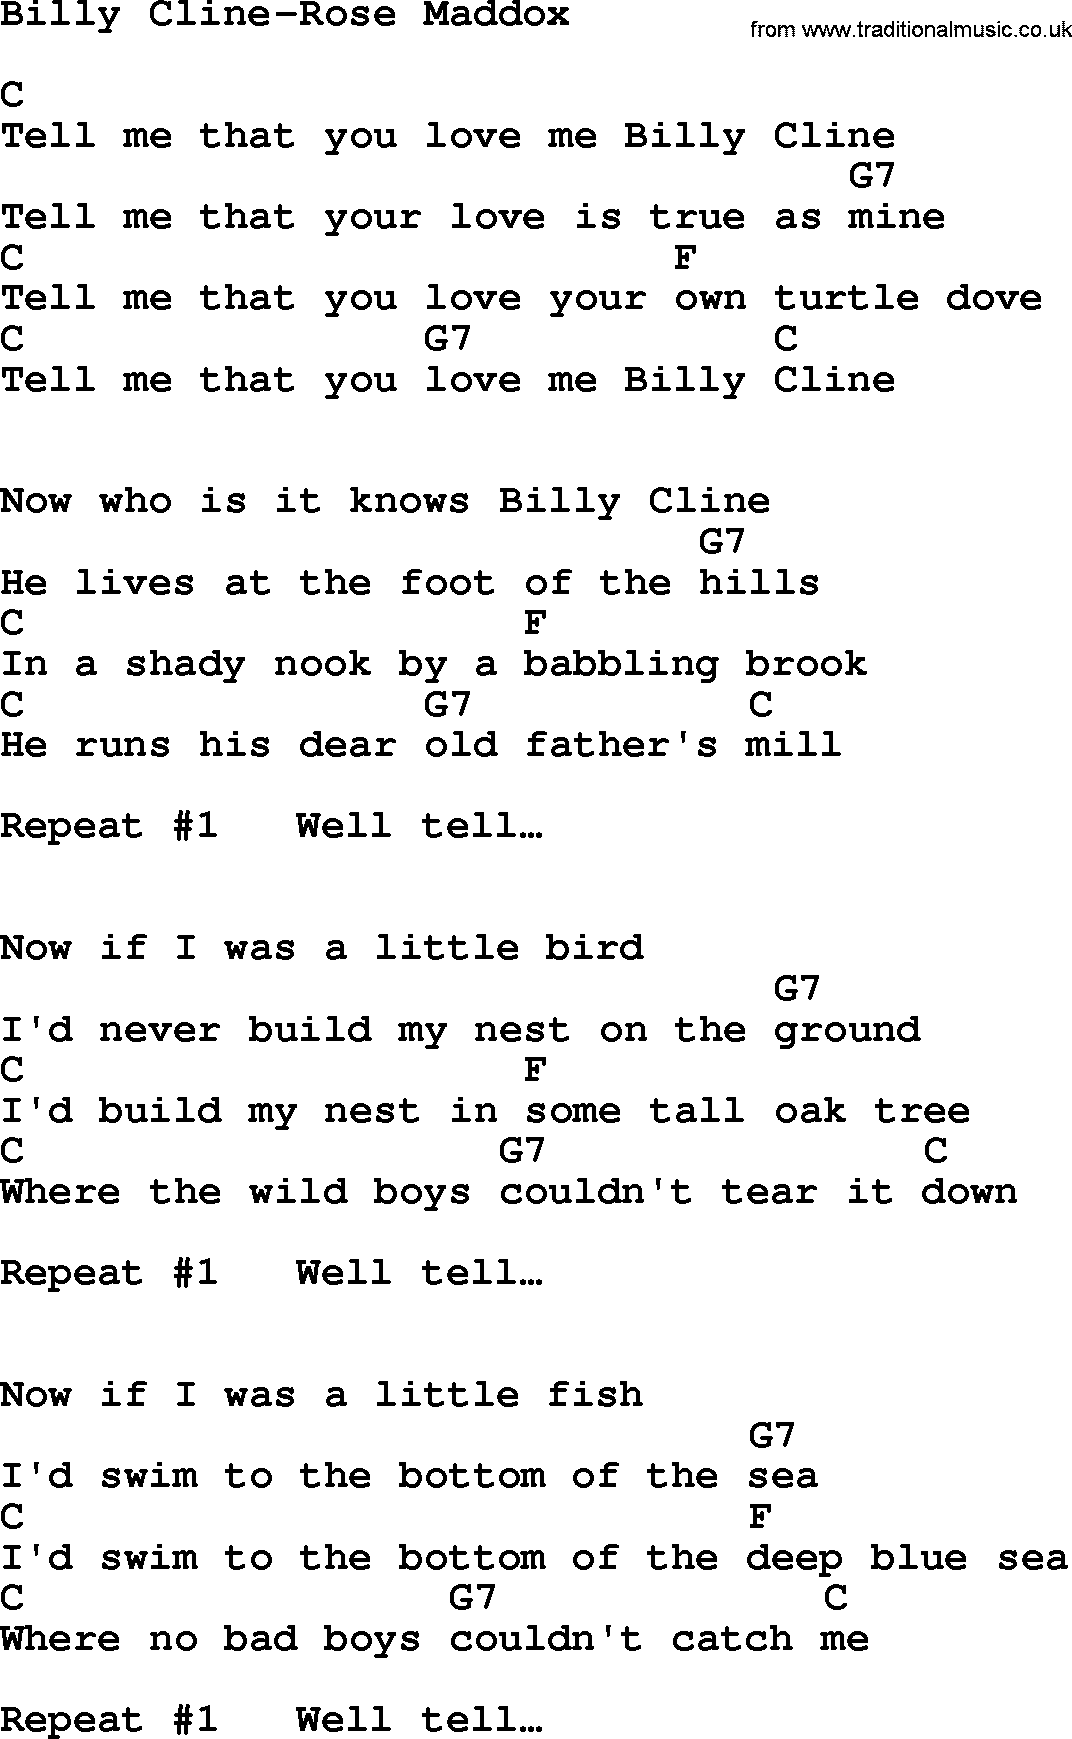 Country music song: Billy Cline-Rose Maddox lyrics and chords